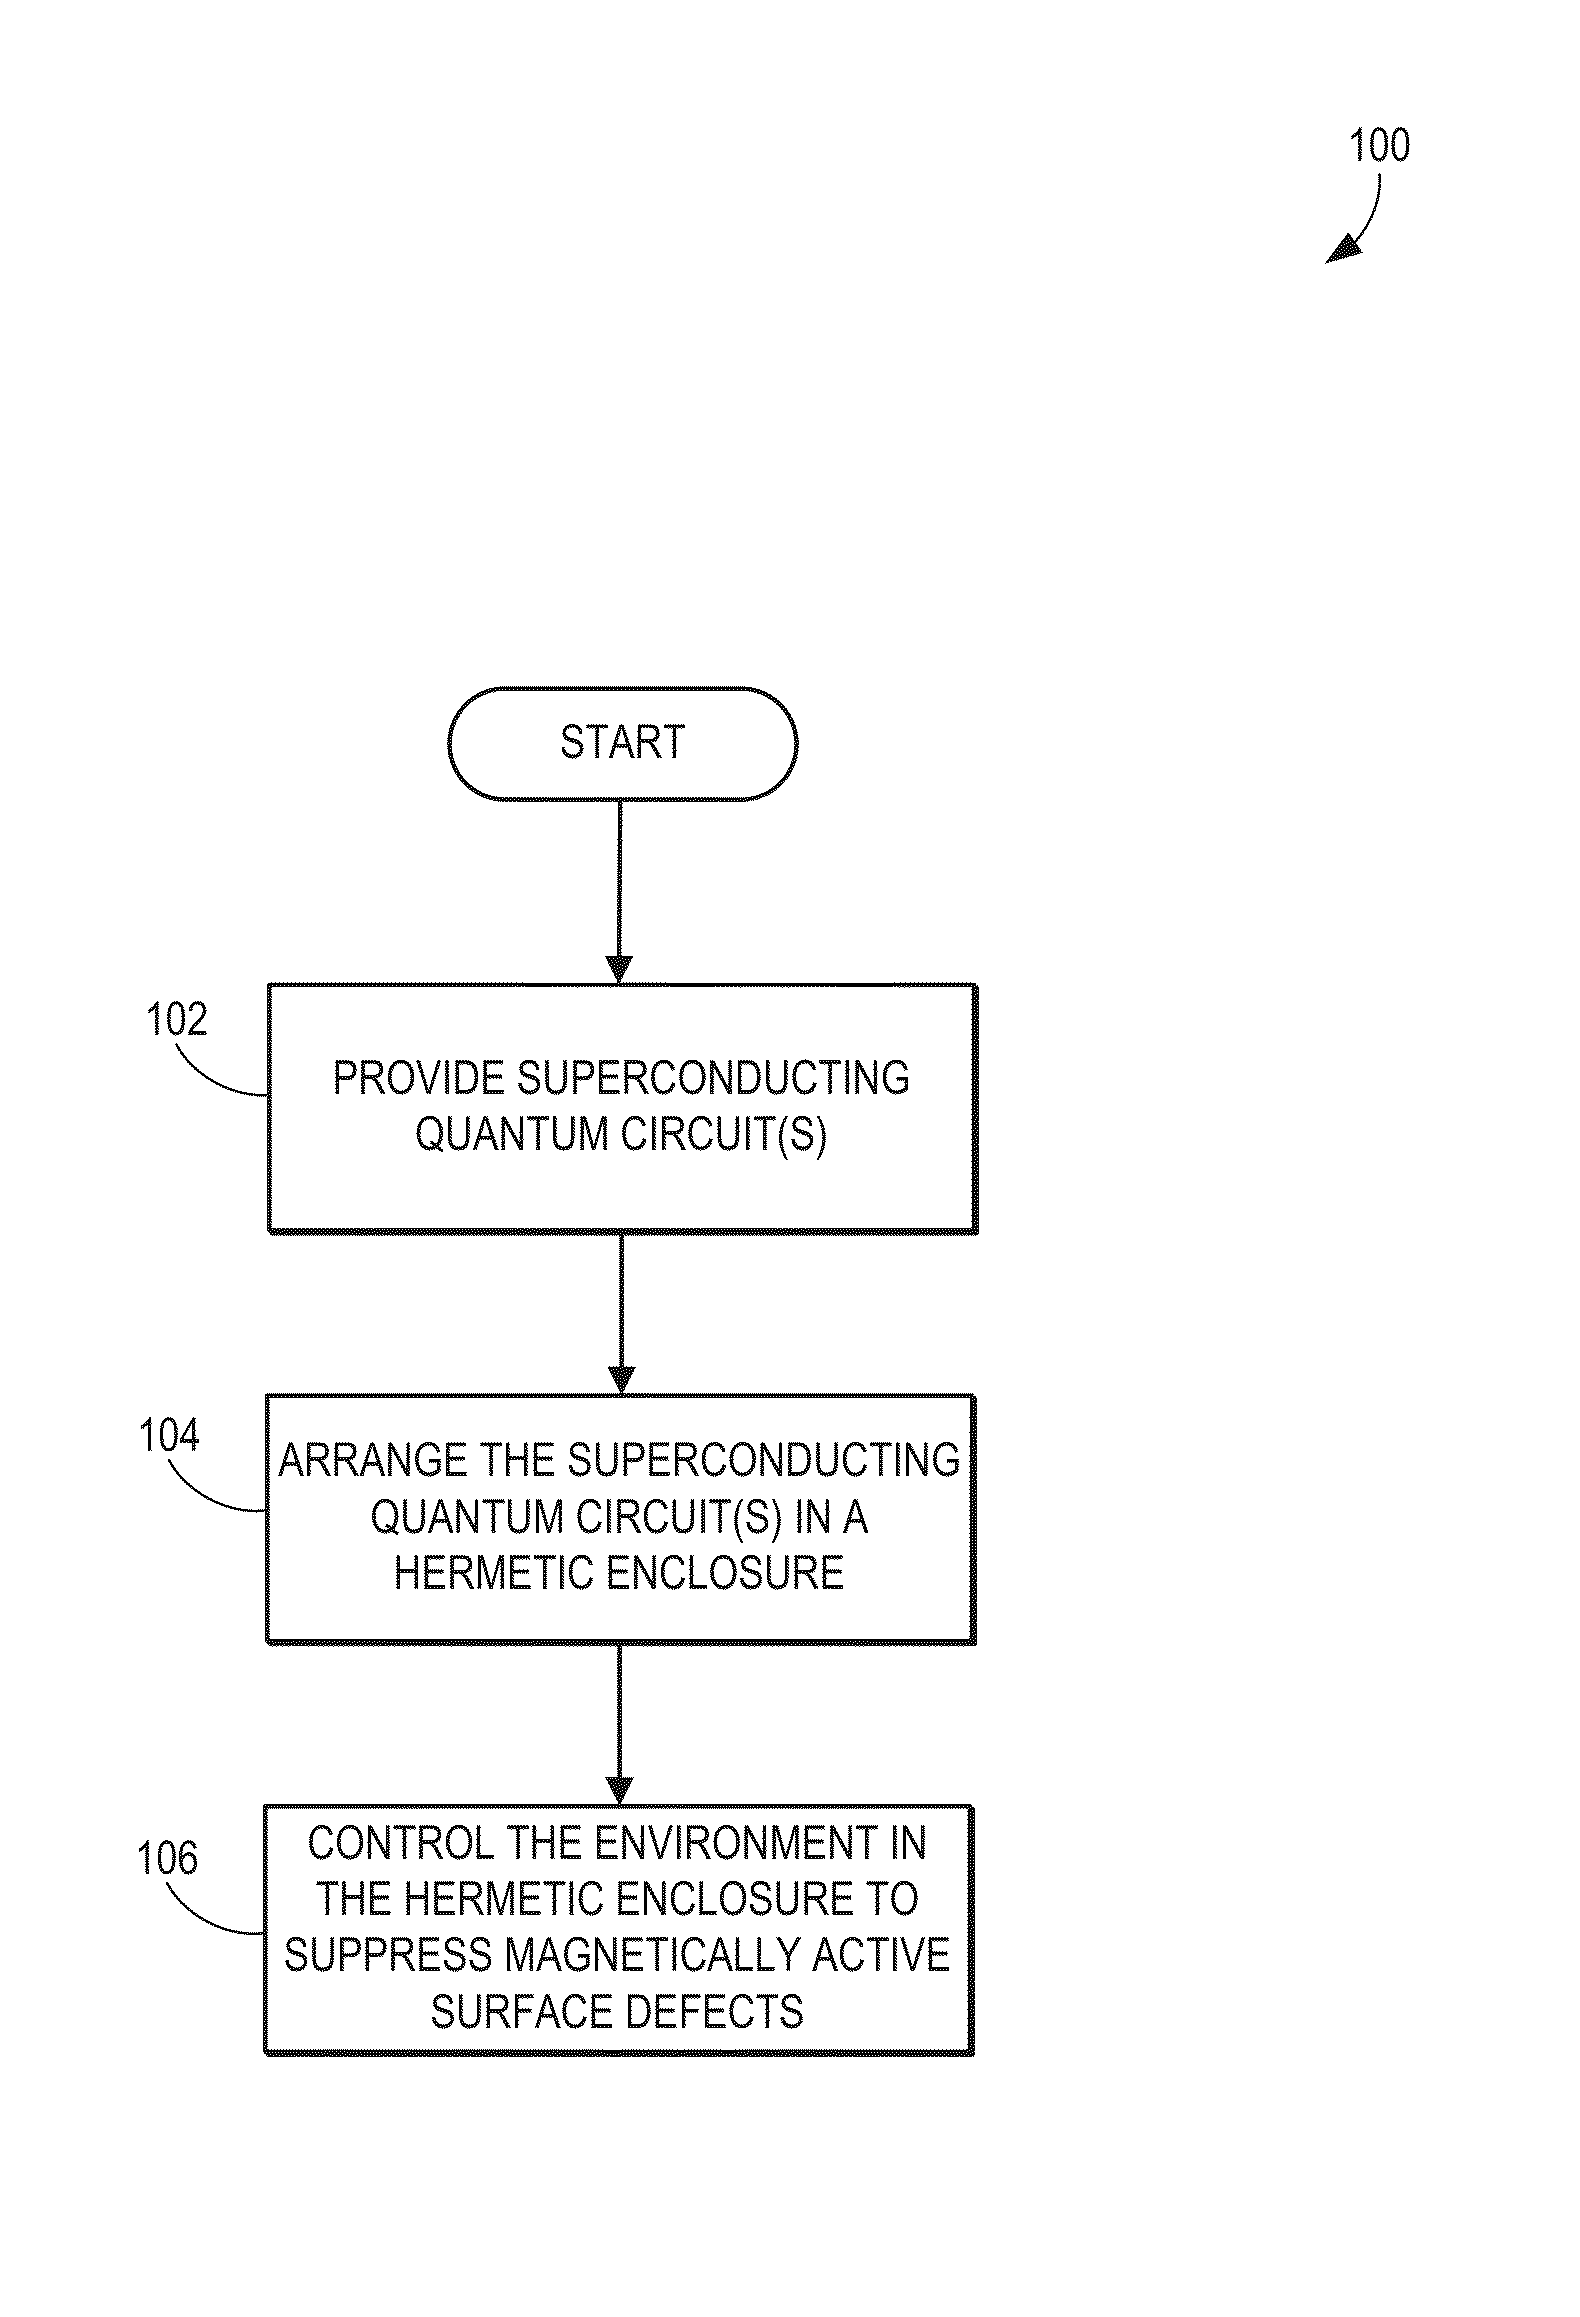 Systems and methods for suppressing magnetically active surface defects in superconducting circuits